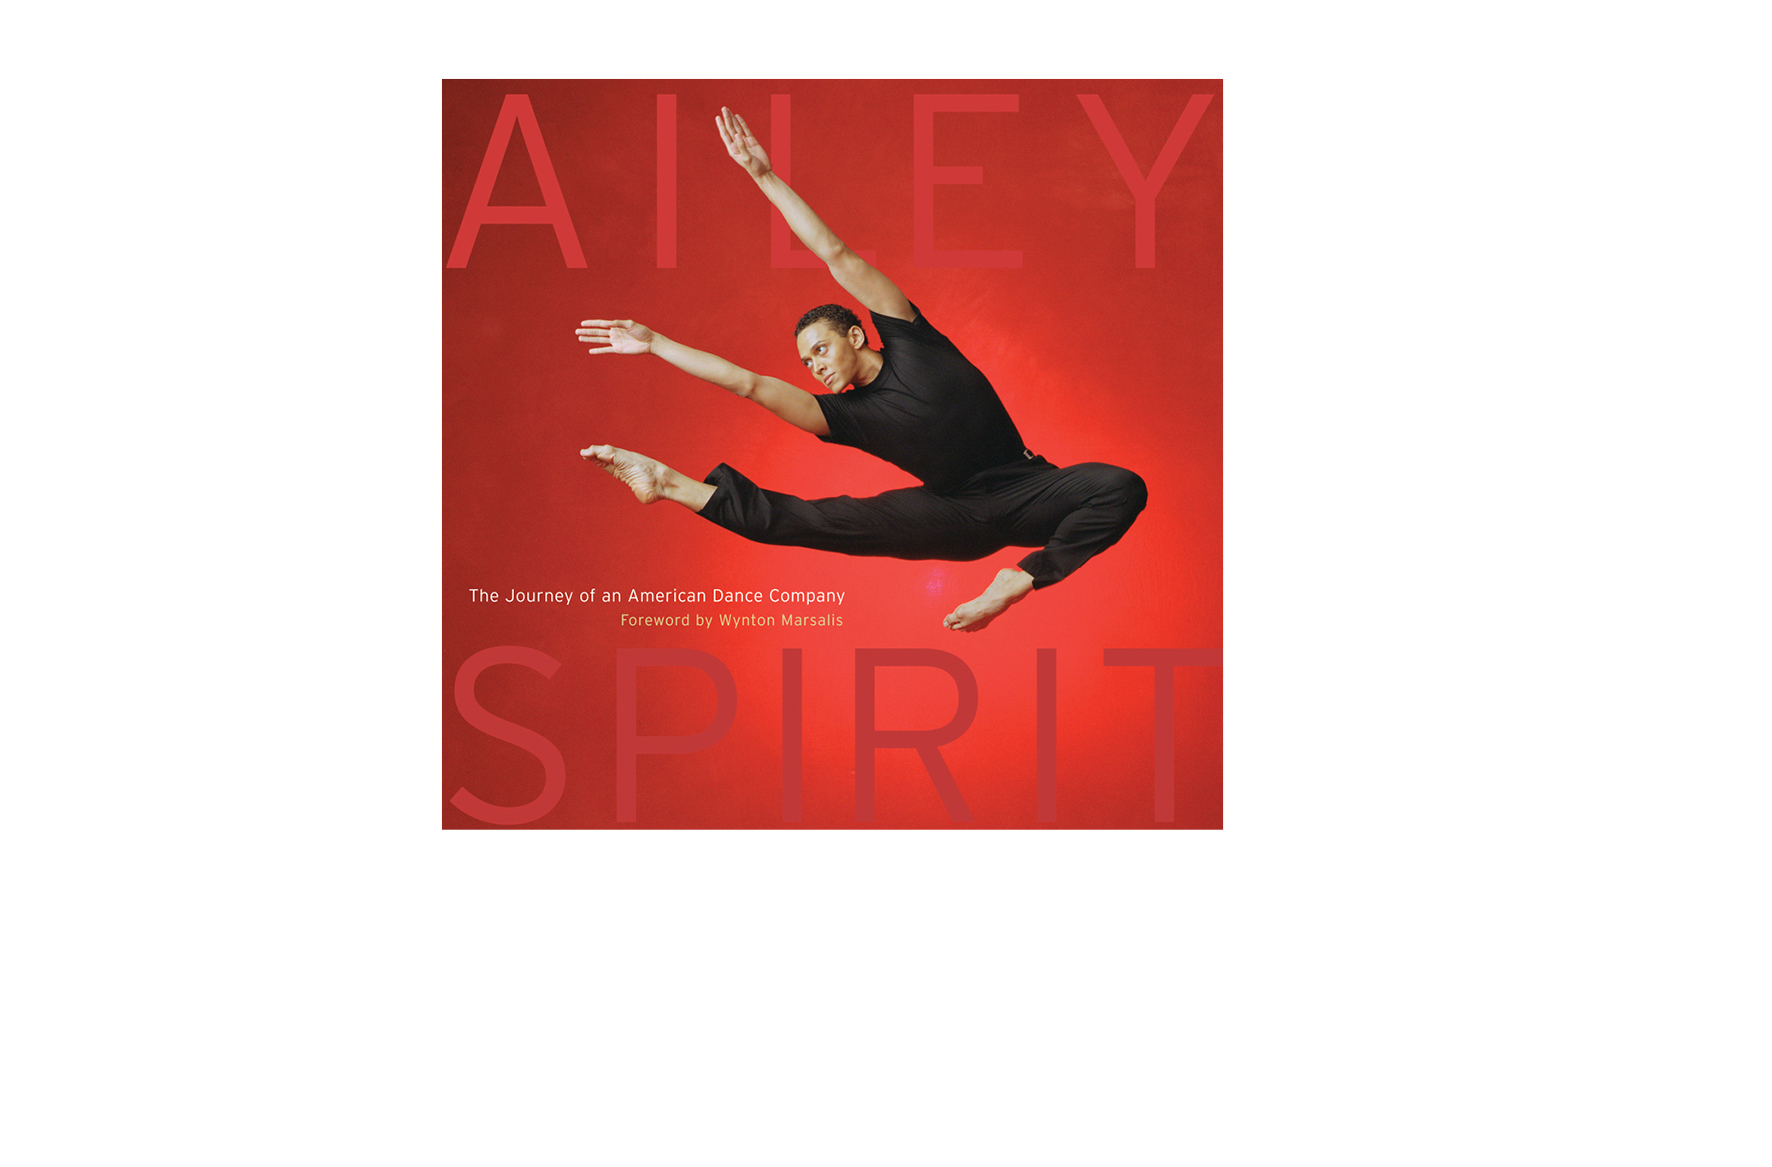   Ailey Spirit -  10.25 X 9.875 in., 168 pg., hardcover with jacket. Design; Galen Smith // Publisher; Abrams Books      